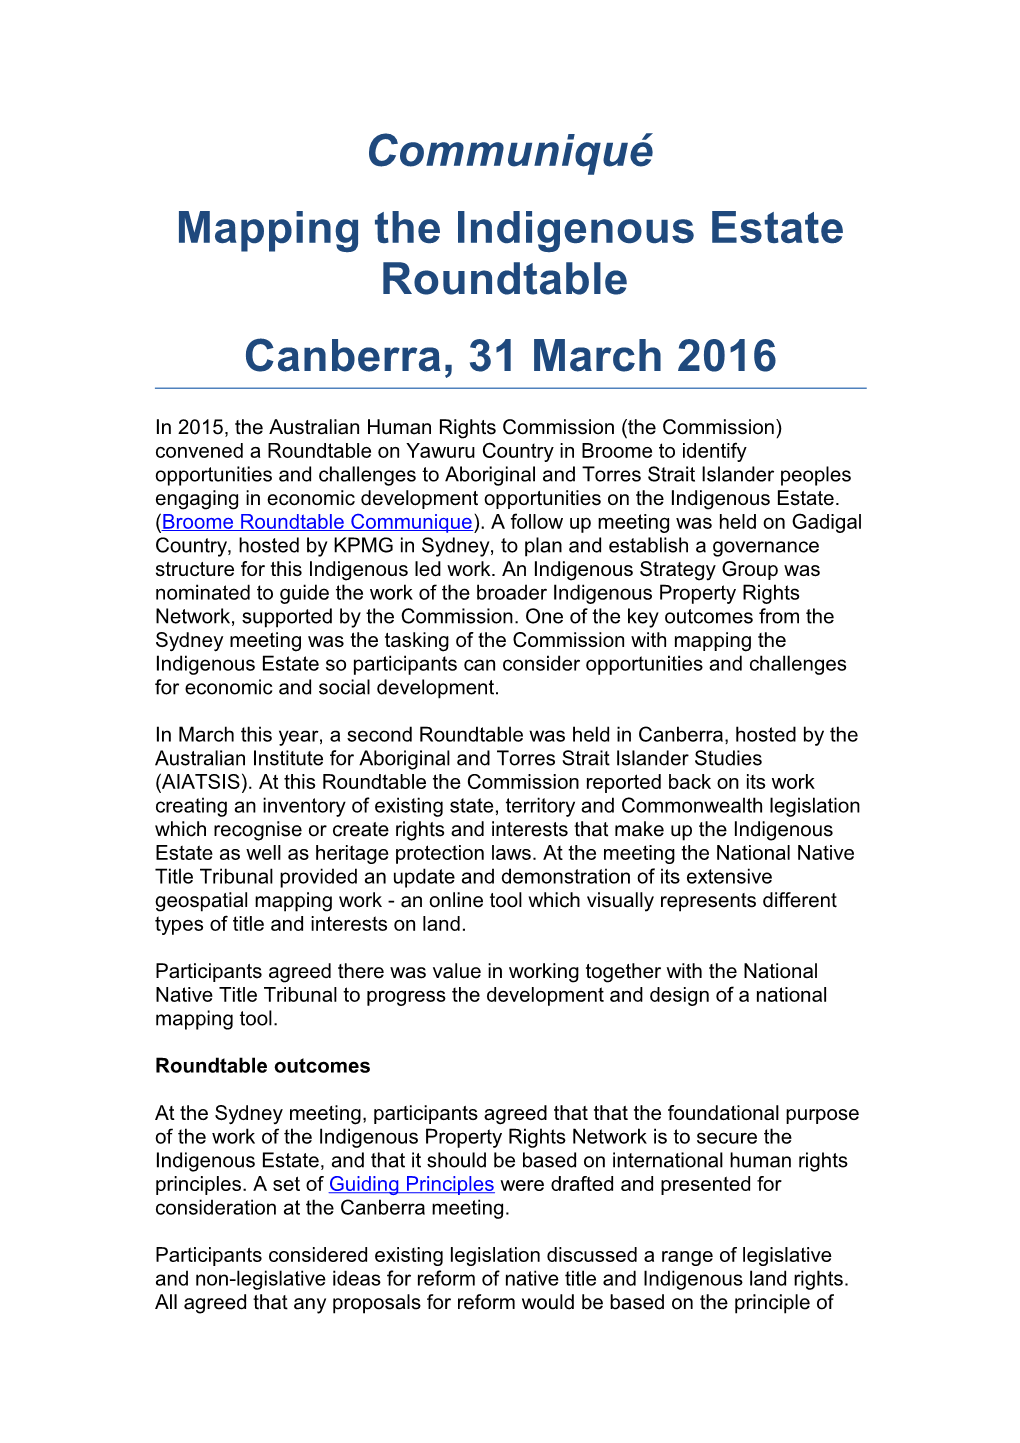 Mapping the Indigenous Estate Roundtable